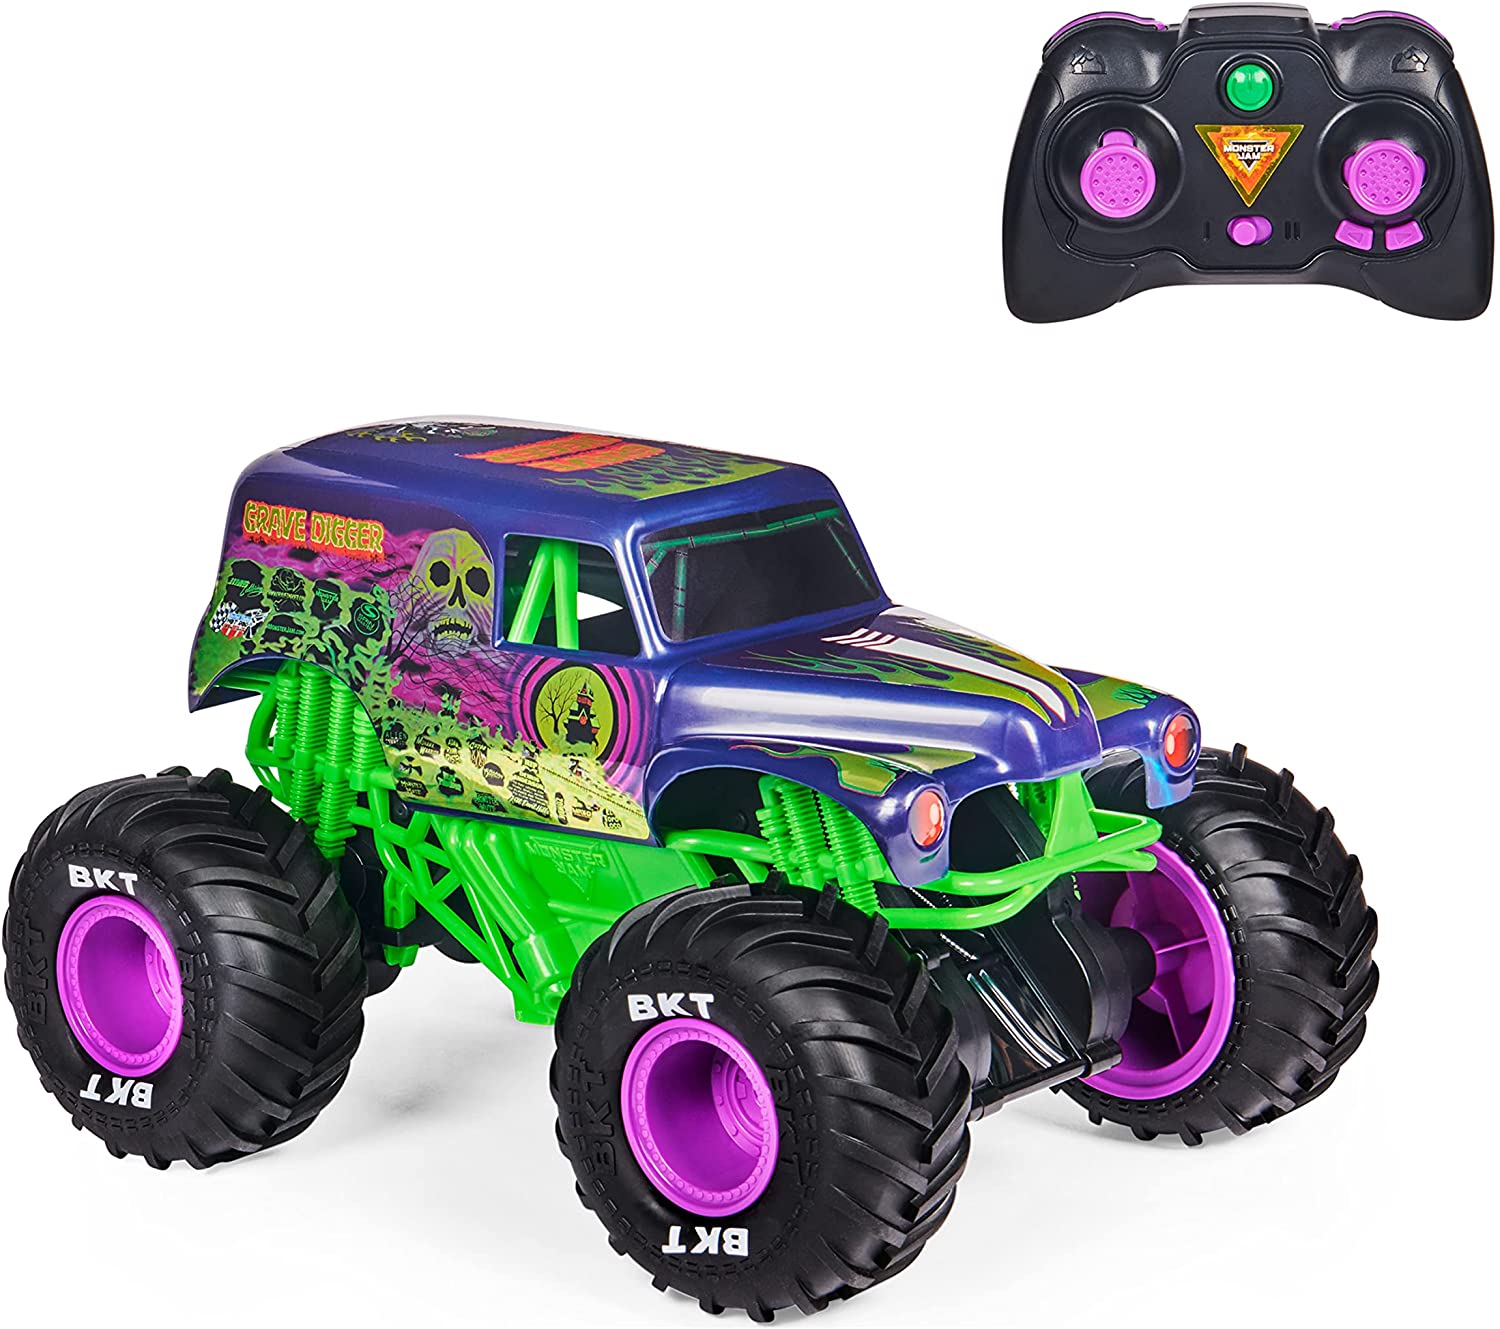 Monster Jam 1:15 Scale Official Grave Digger Freestyle Force Monster Truck Remote Control Car $30 + Free Shipping